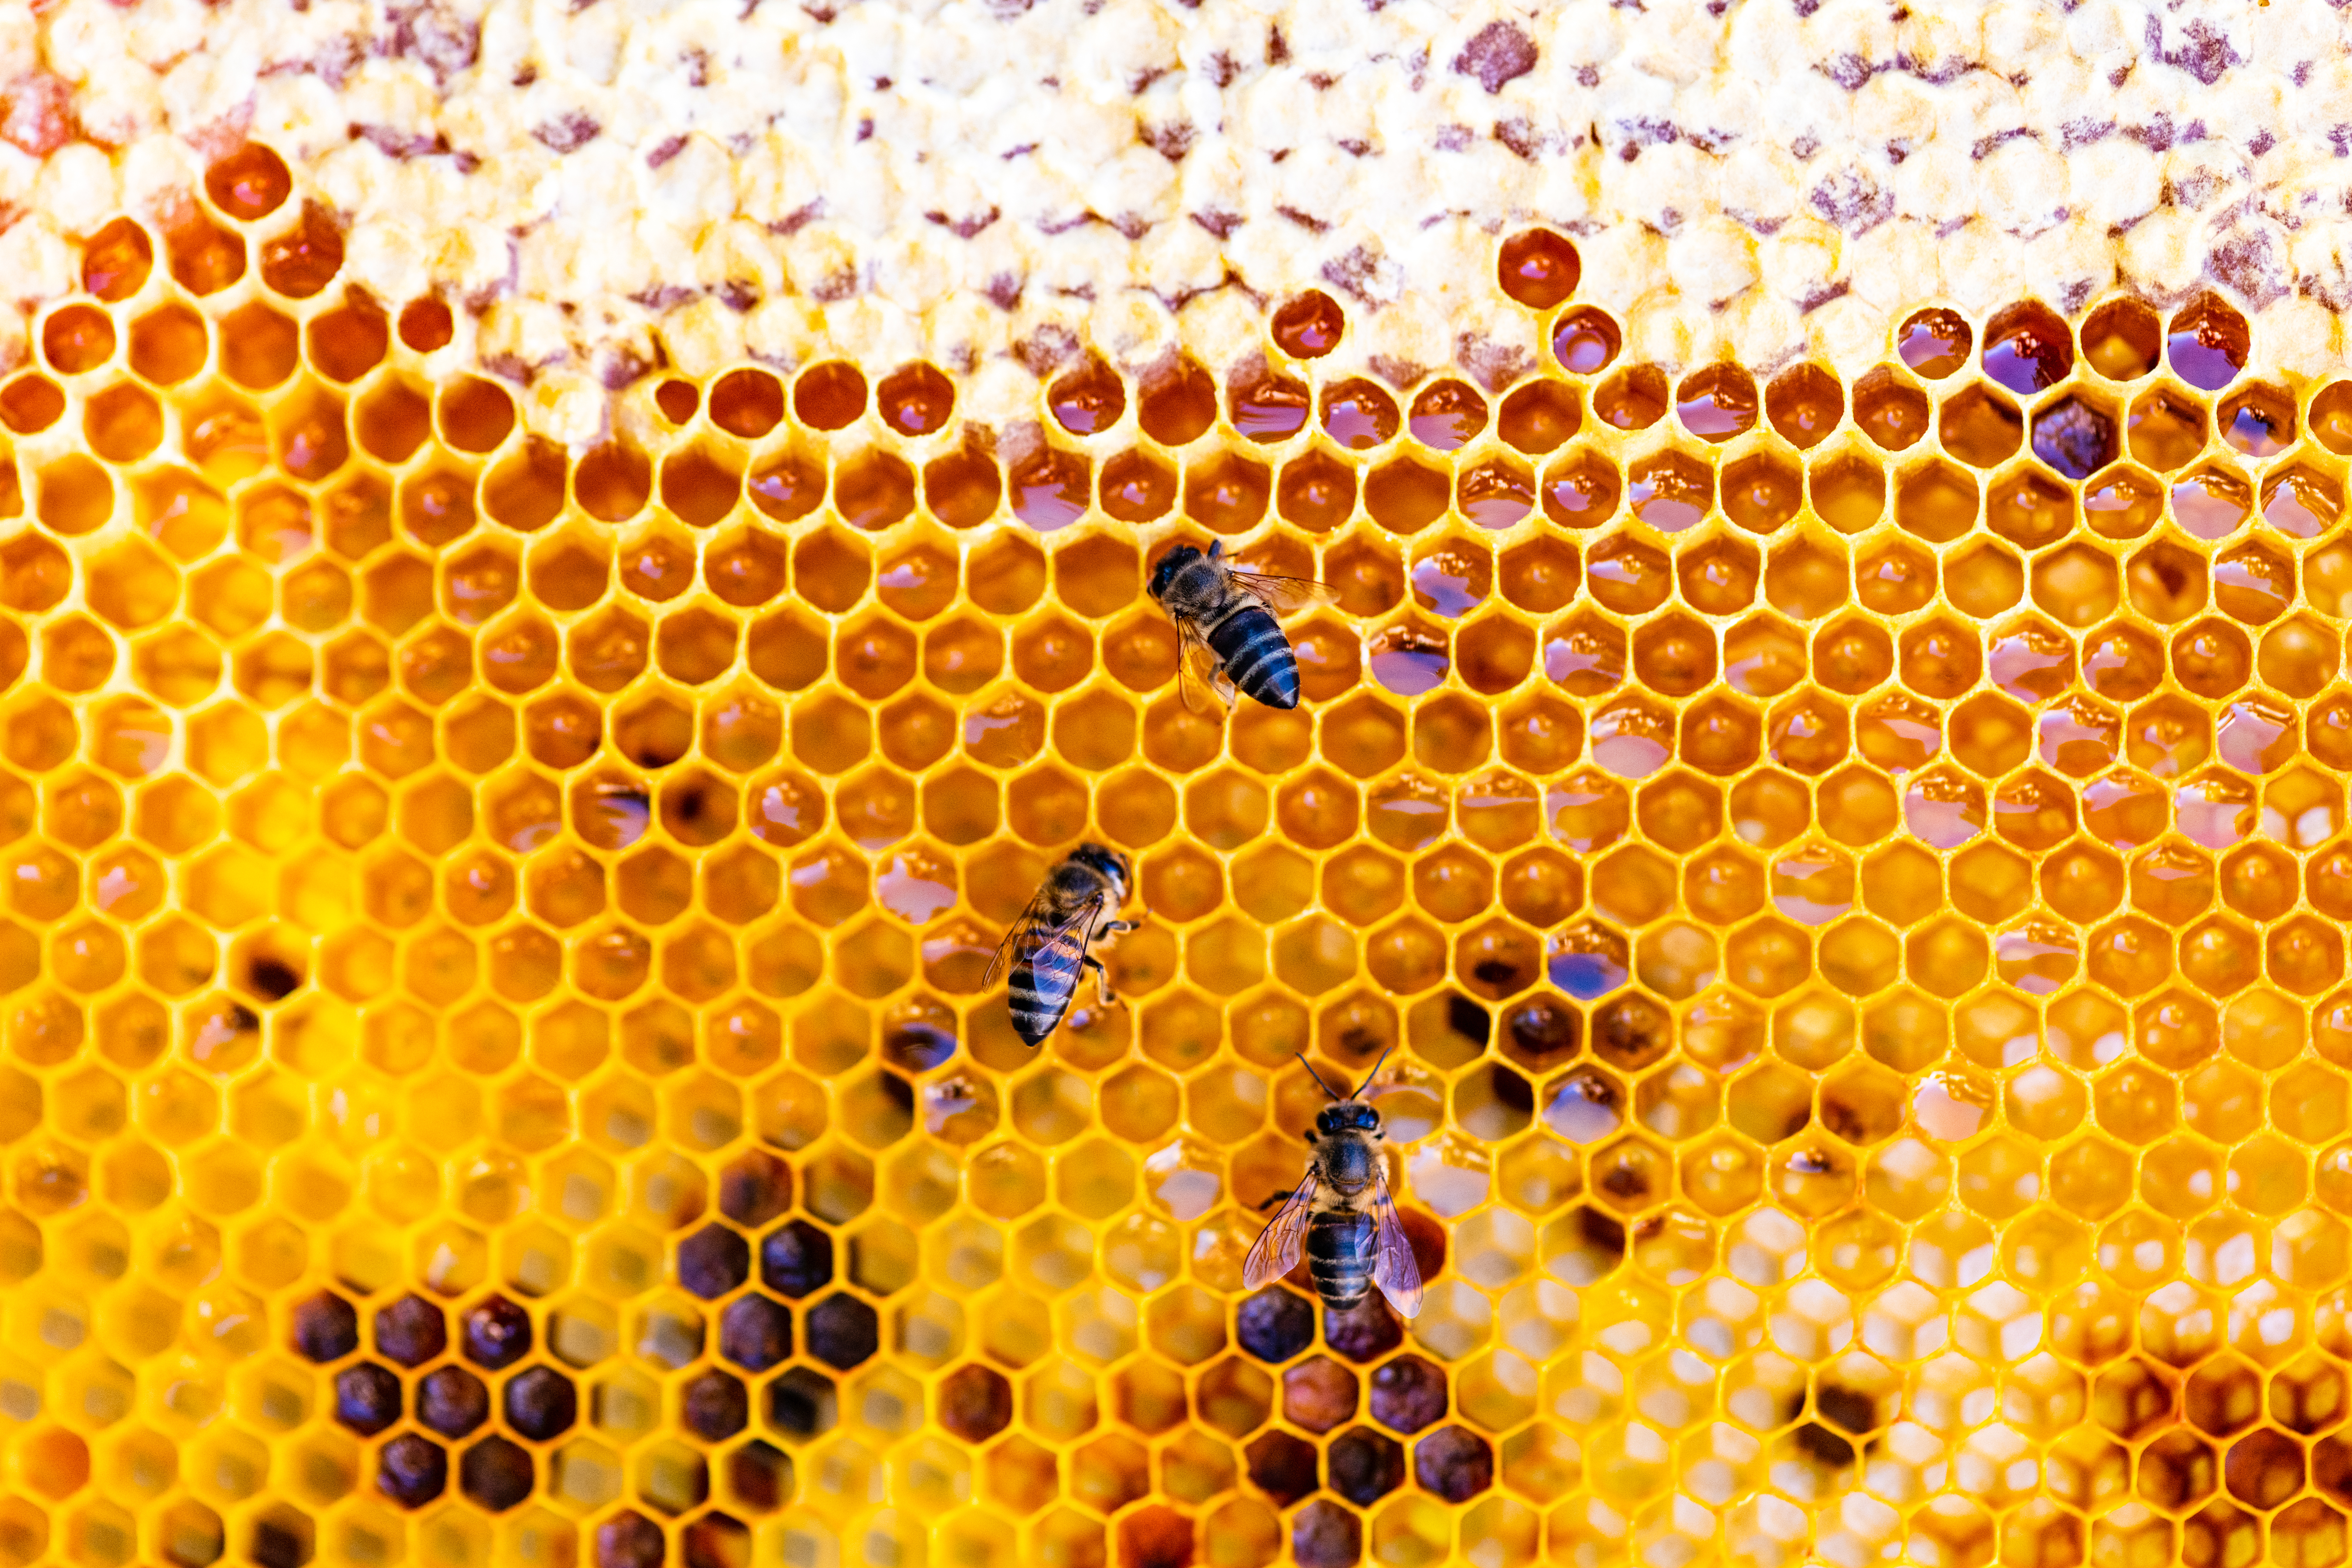 Bees on honeycomb filled with honey